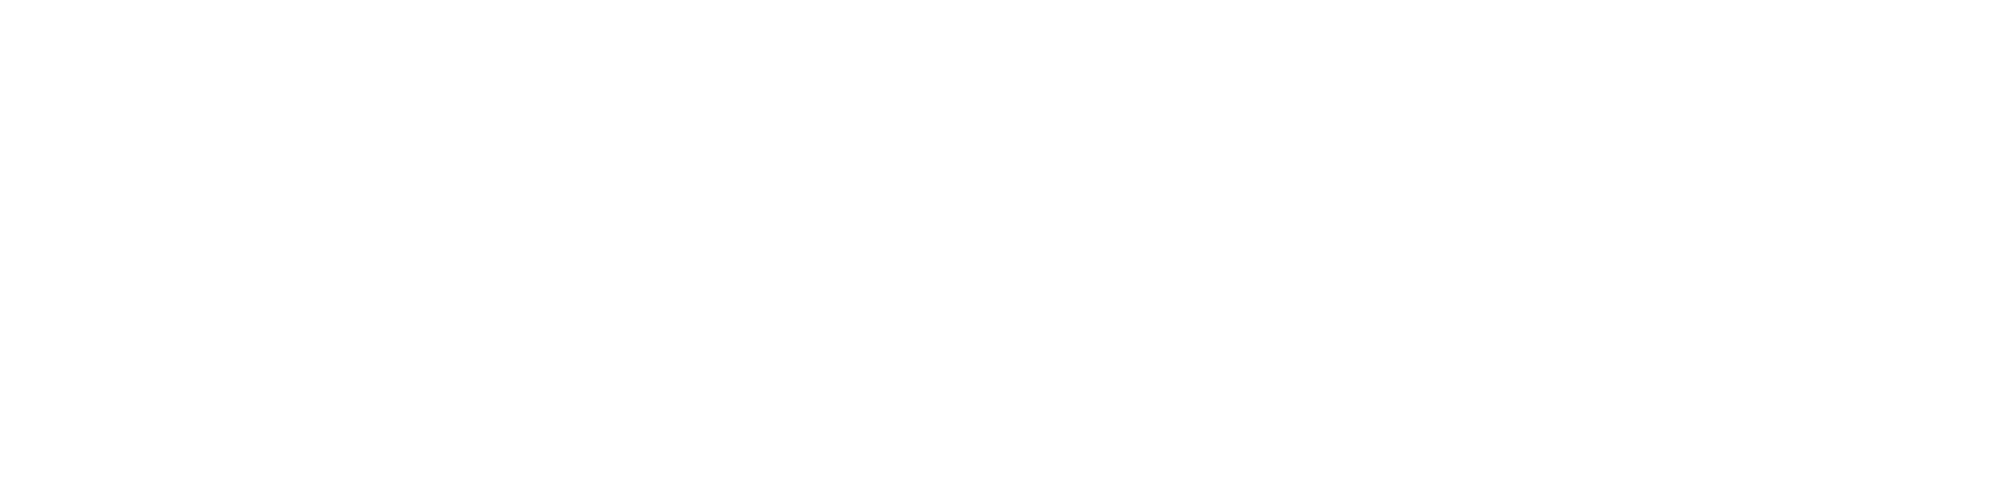 A.M. Shaw Group